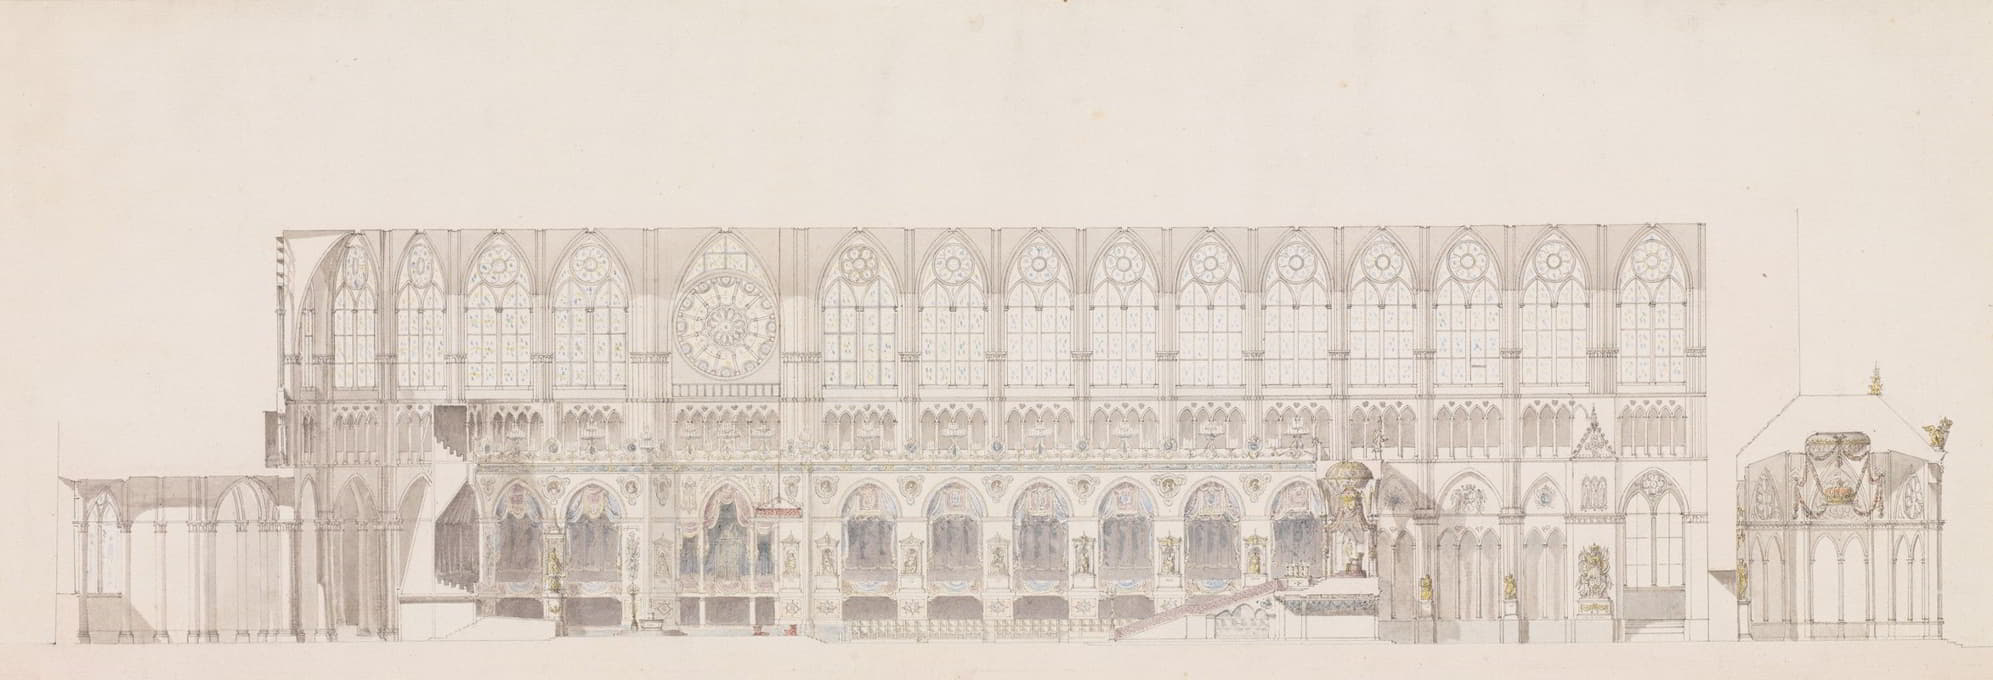 Charles Percier - Cross Section of the Nave of Reims Cathedral, decorated for the Coronation of King Louis XVIII